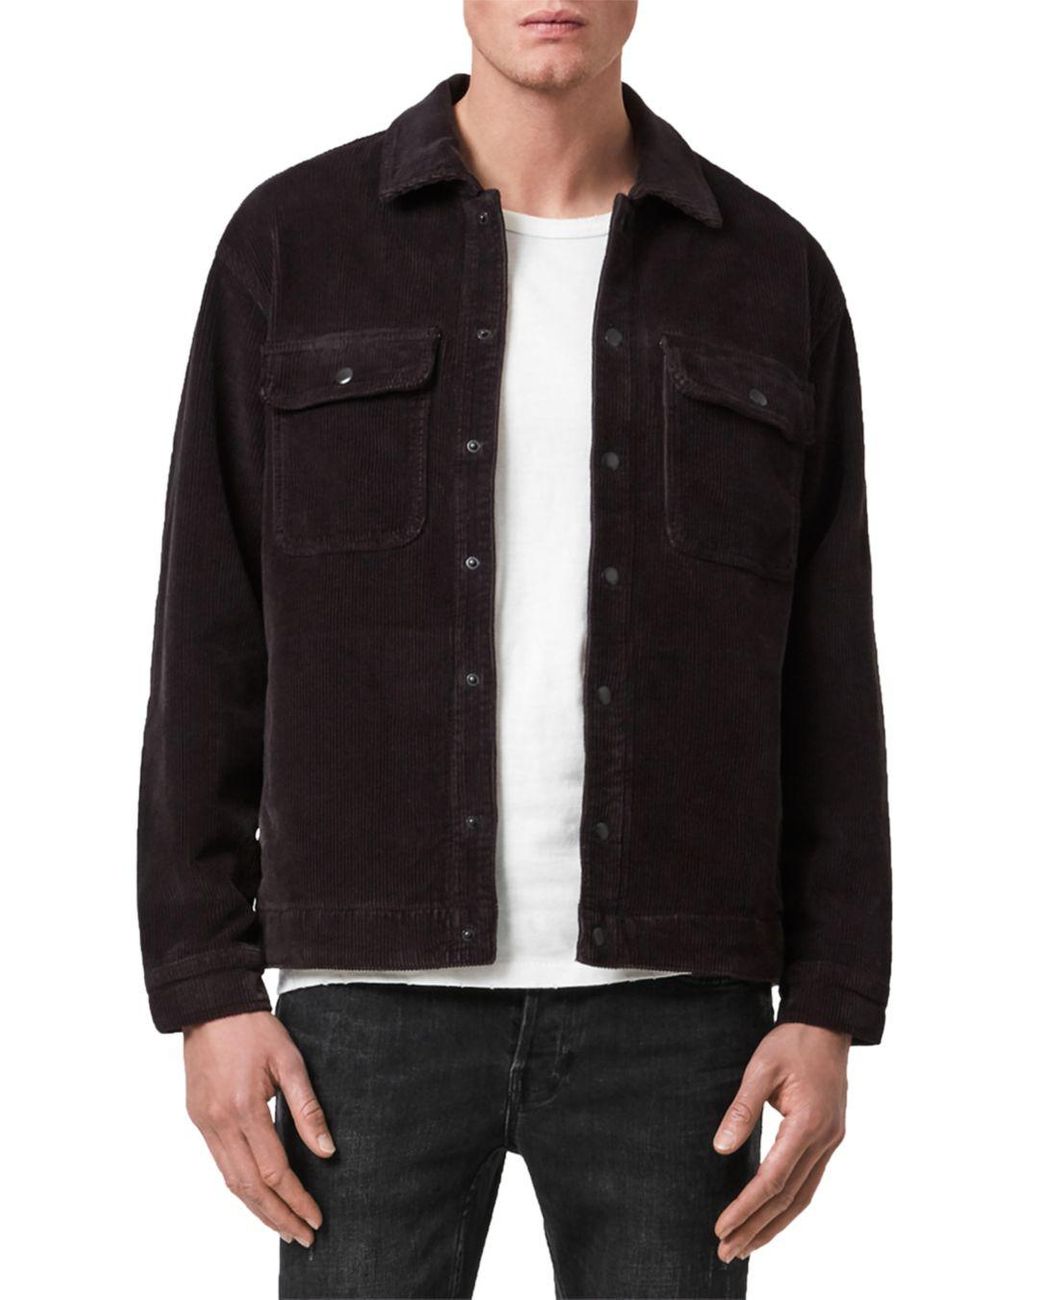 AllSaints Castleford Corduroy Relaxed Fit Overshirt in Black for Men - Lyst